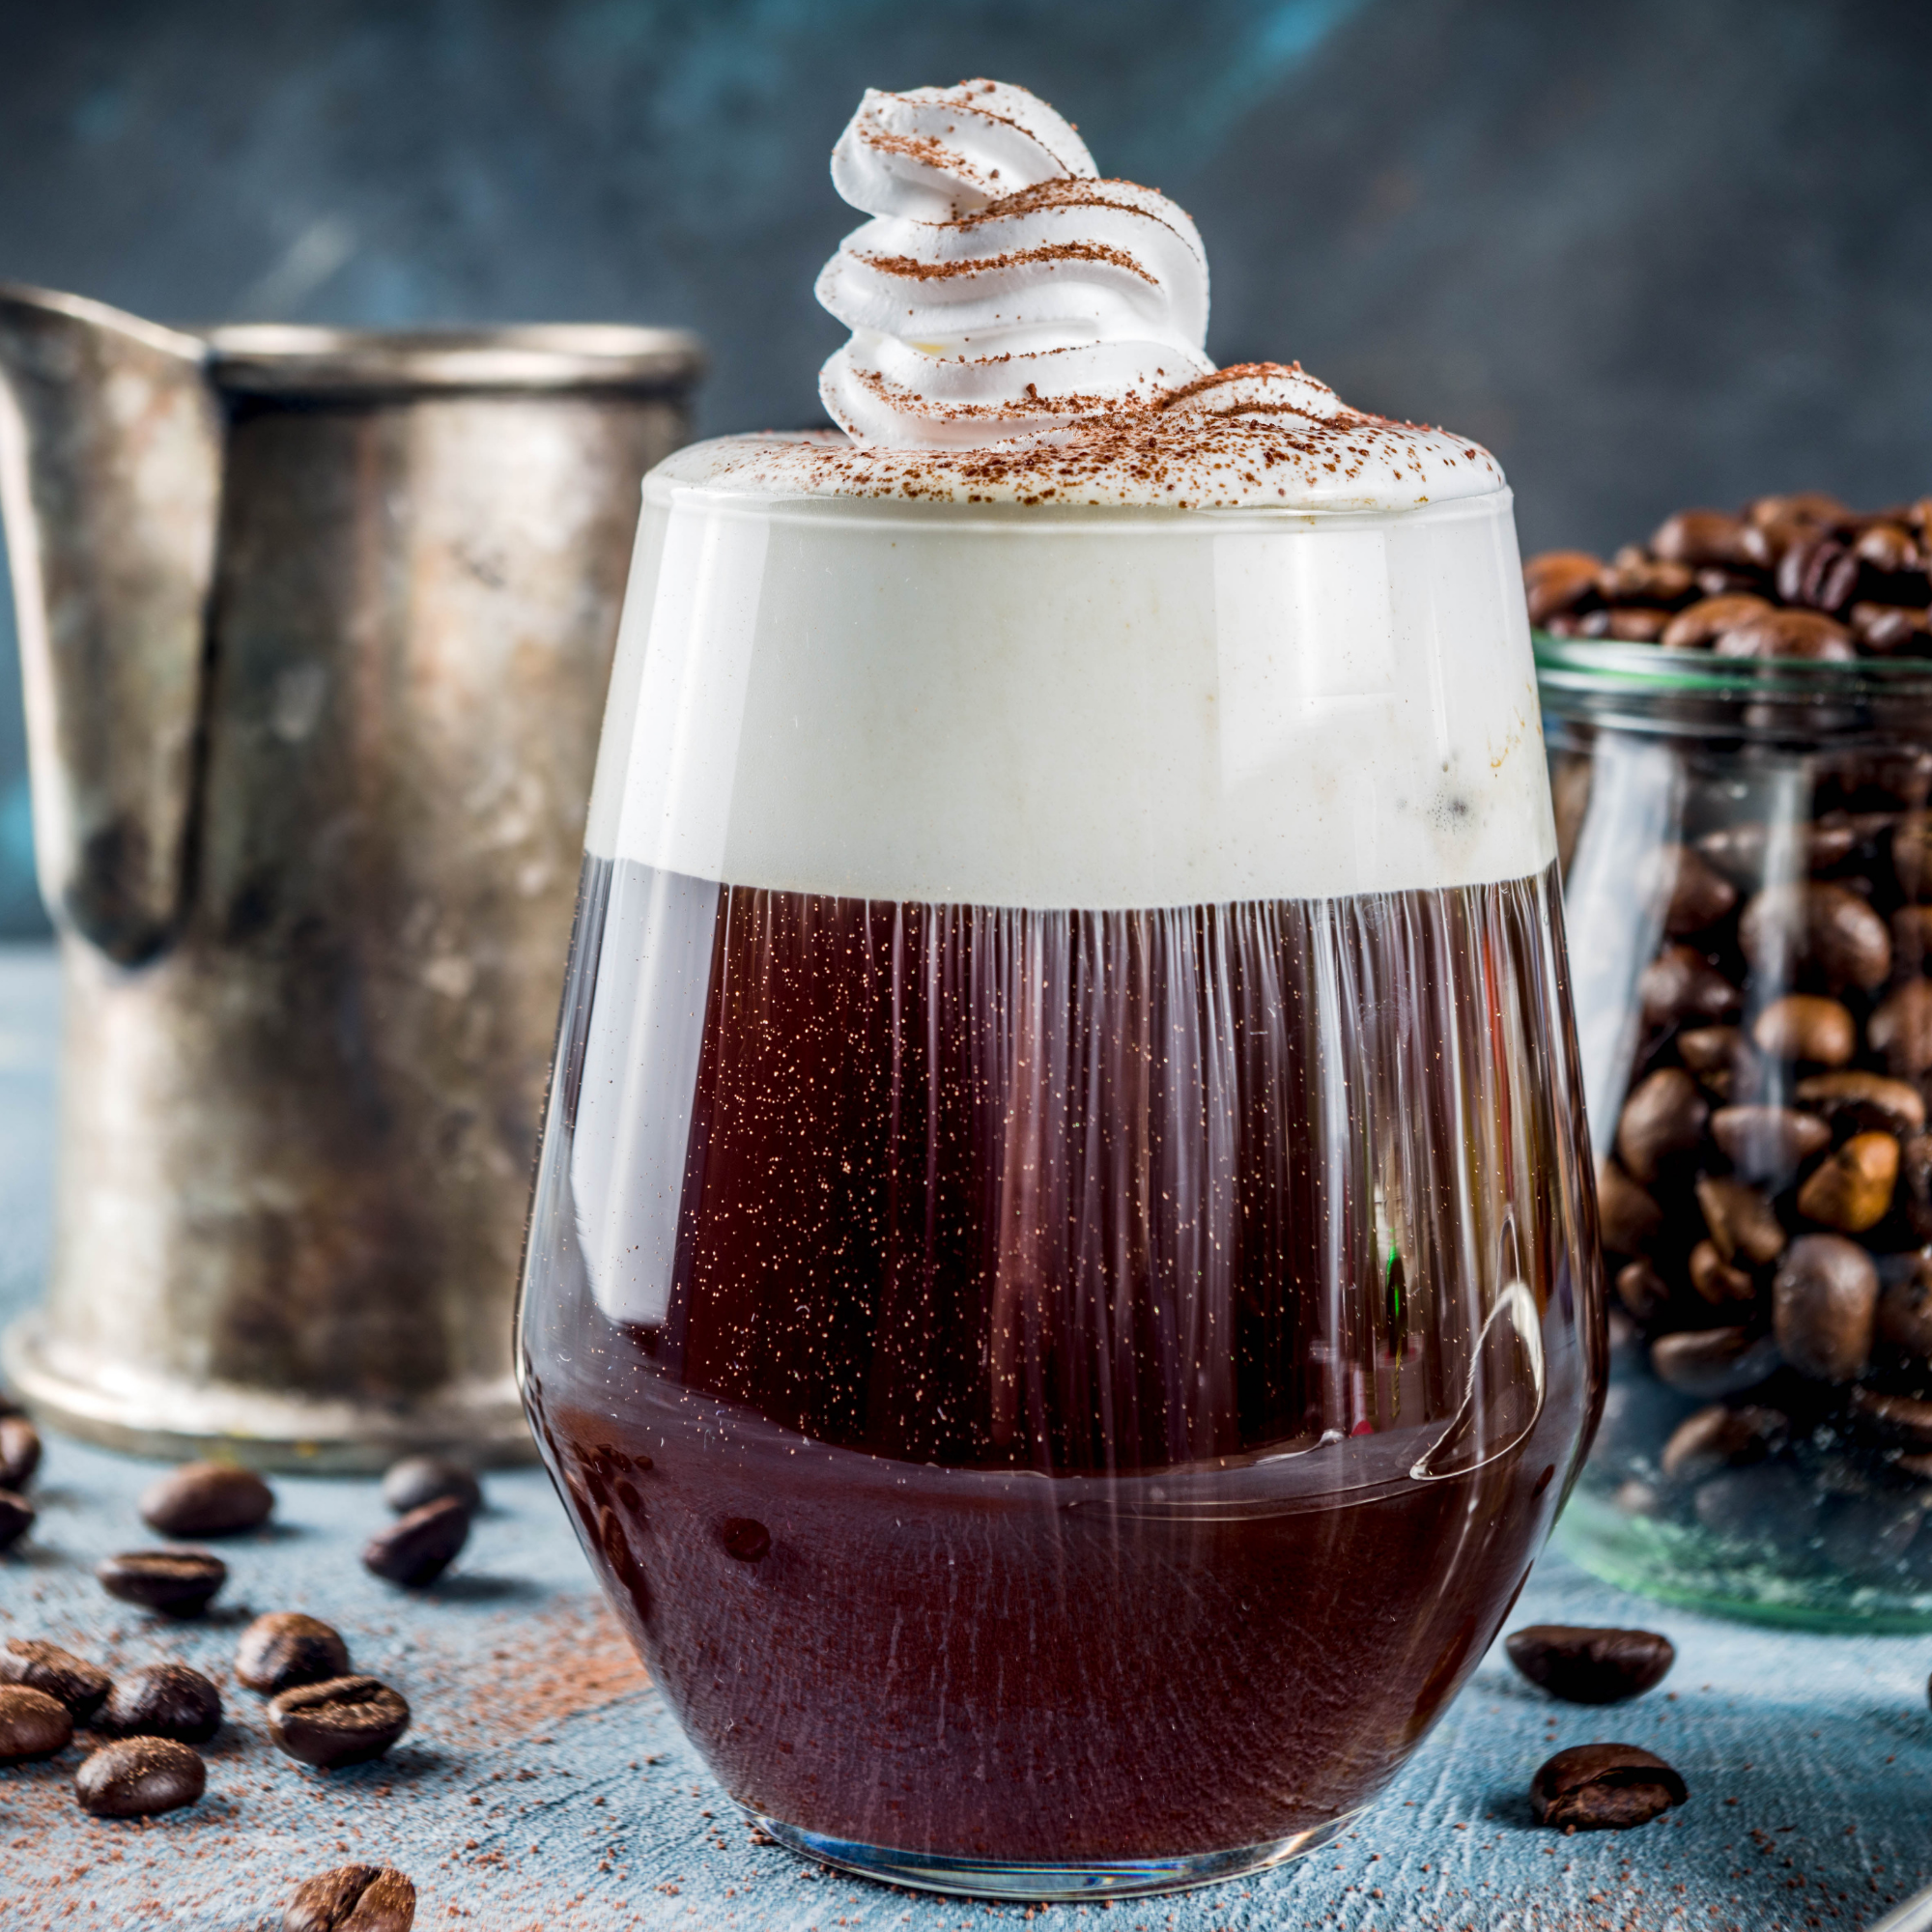 Beyond the Cup: Innovative Uses for Coffee in Recipes and Cocktails